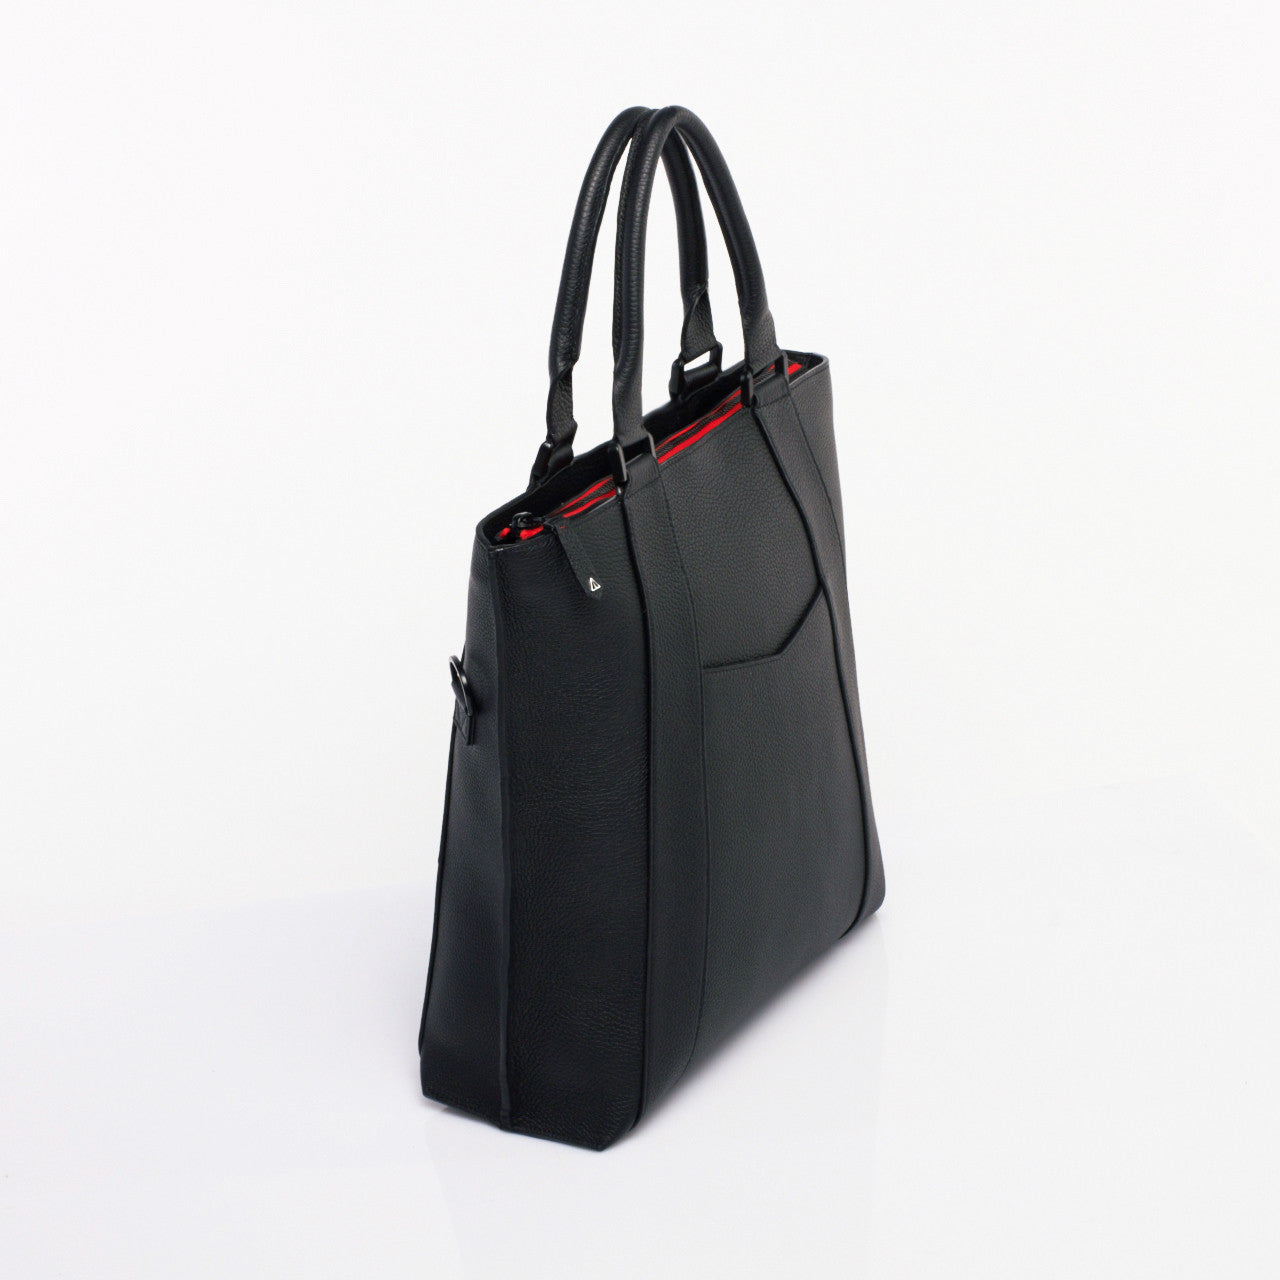 Made in FRANCE Ternes Luxury Tote Bag in Black Calfskin Leather by